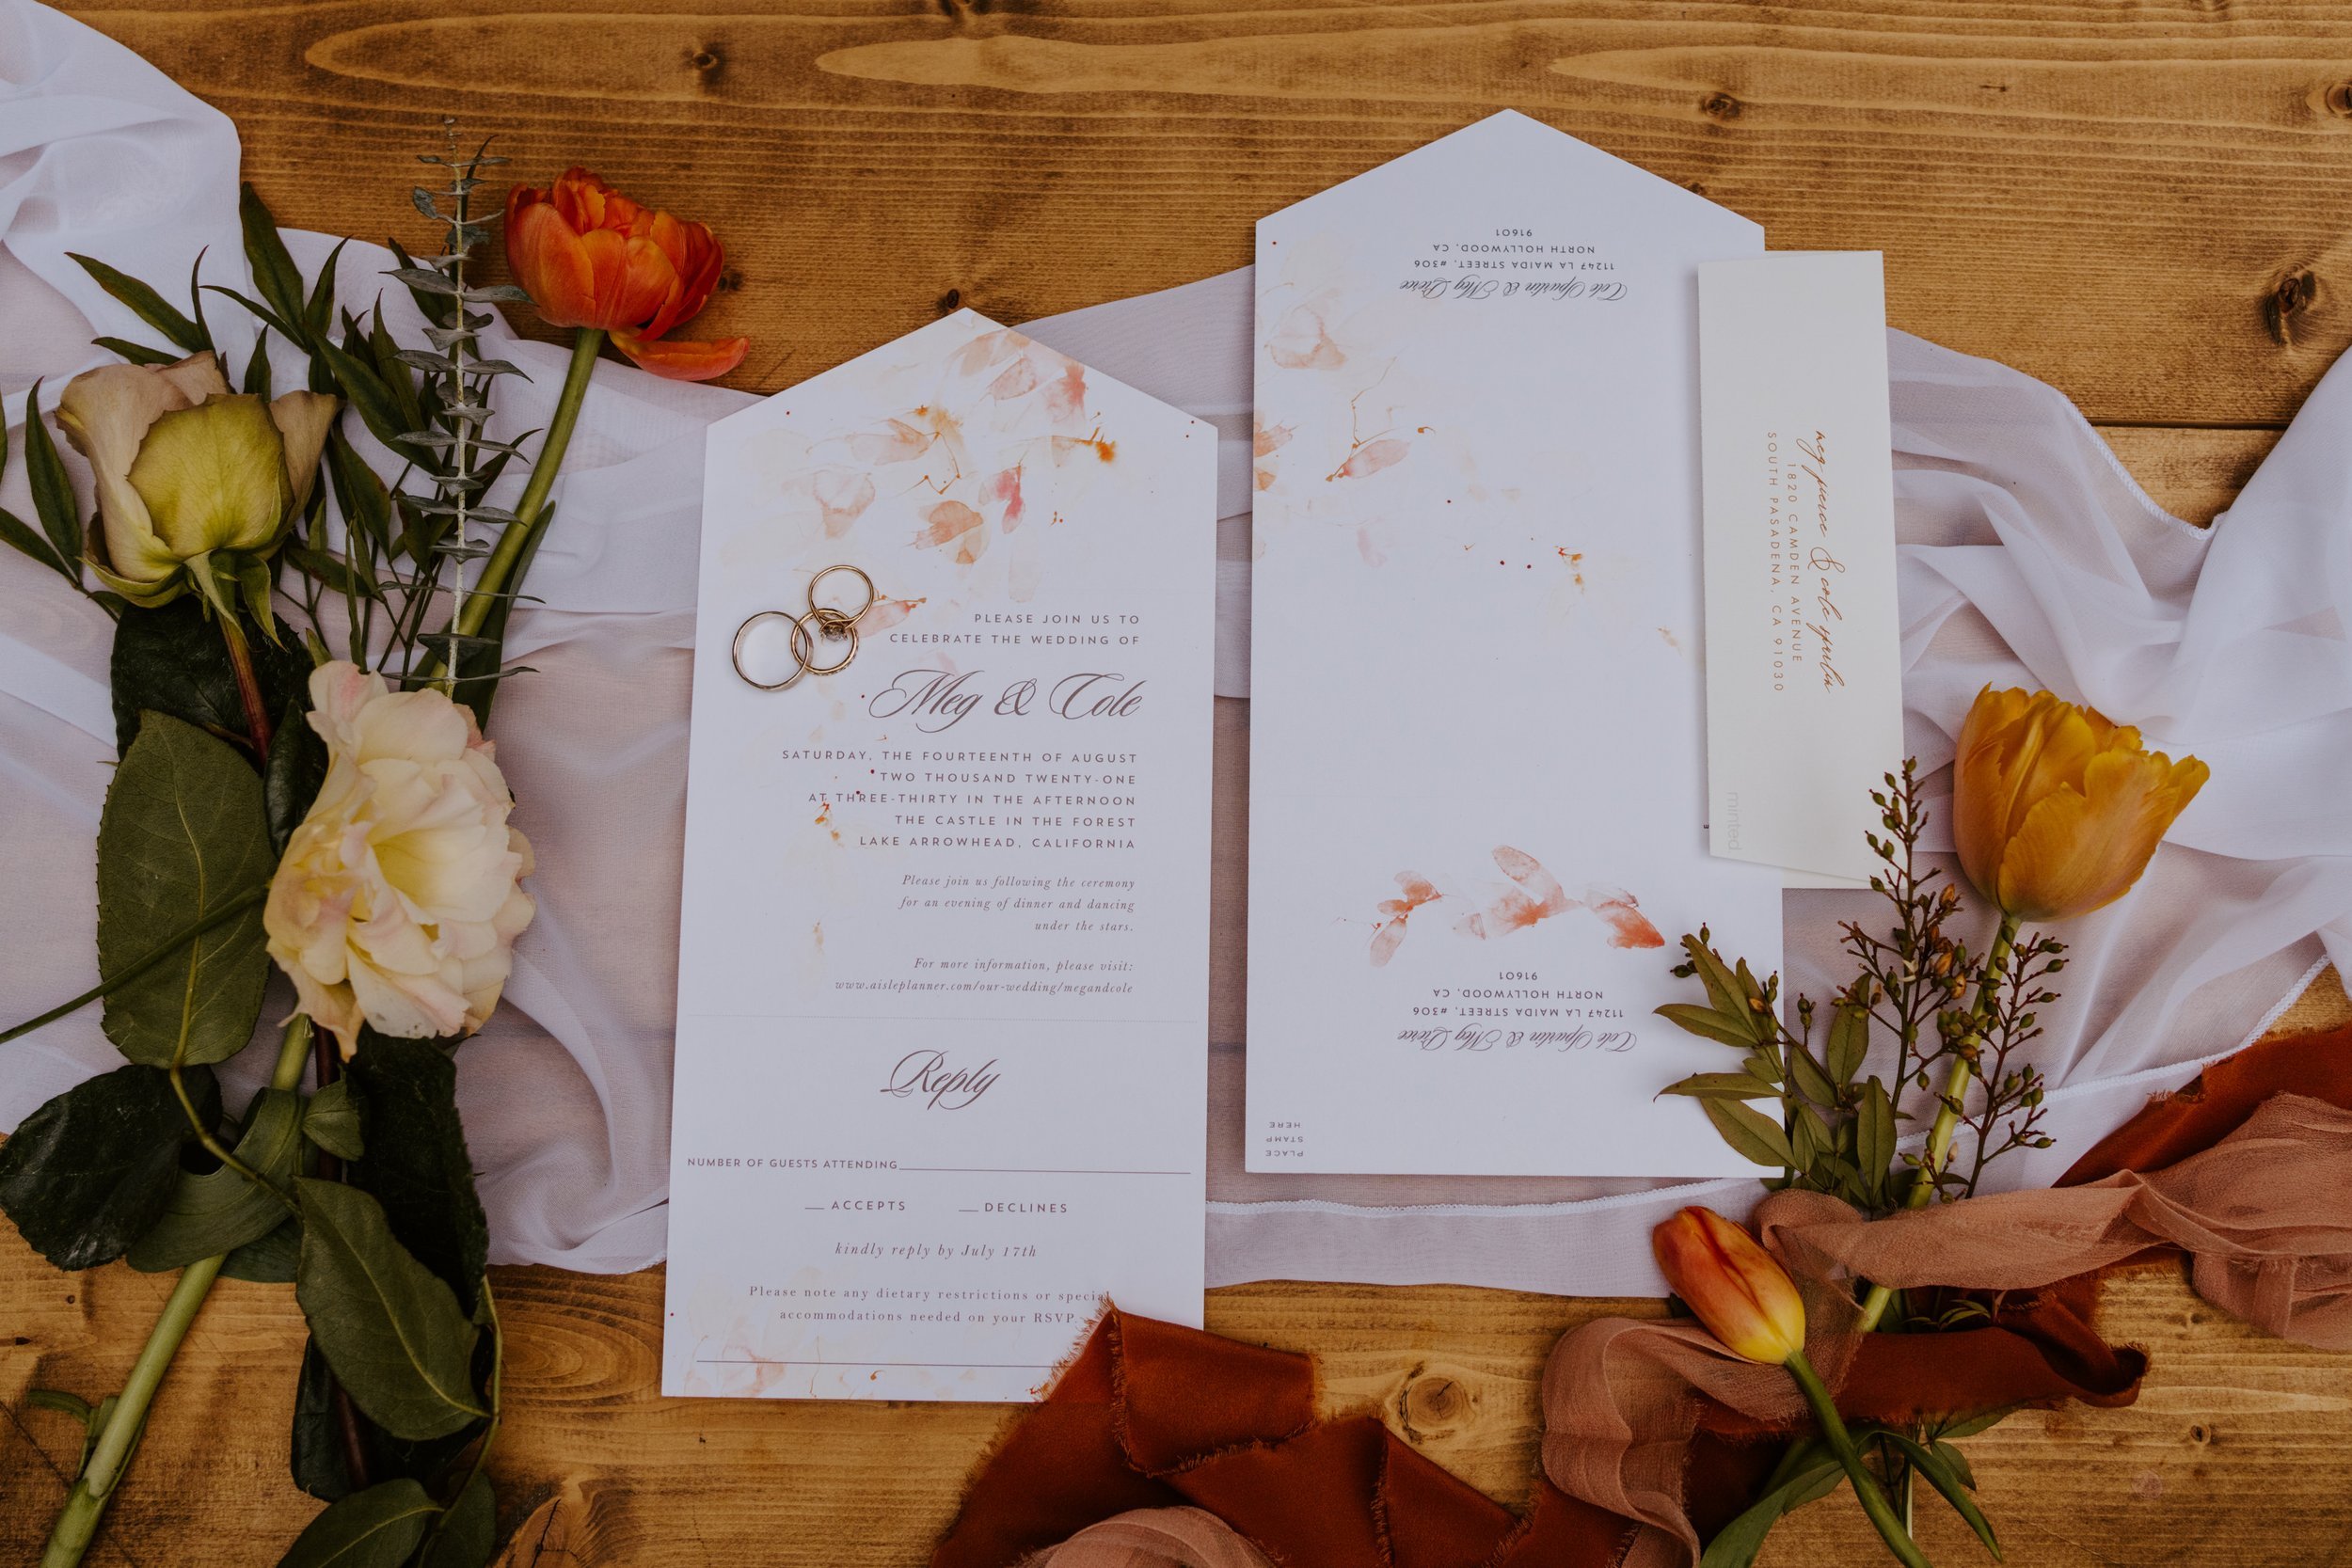 Whimsical and enchanted forest invitation suite with fall florals and colors, photo by Tida Svy Photography